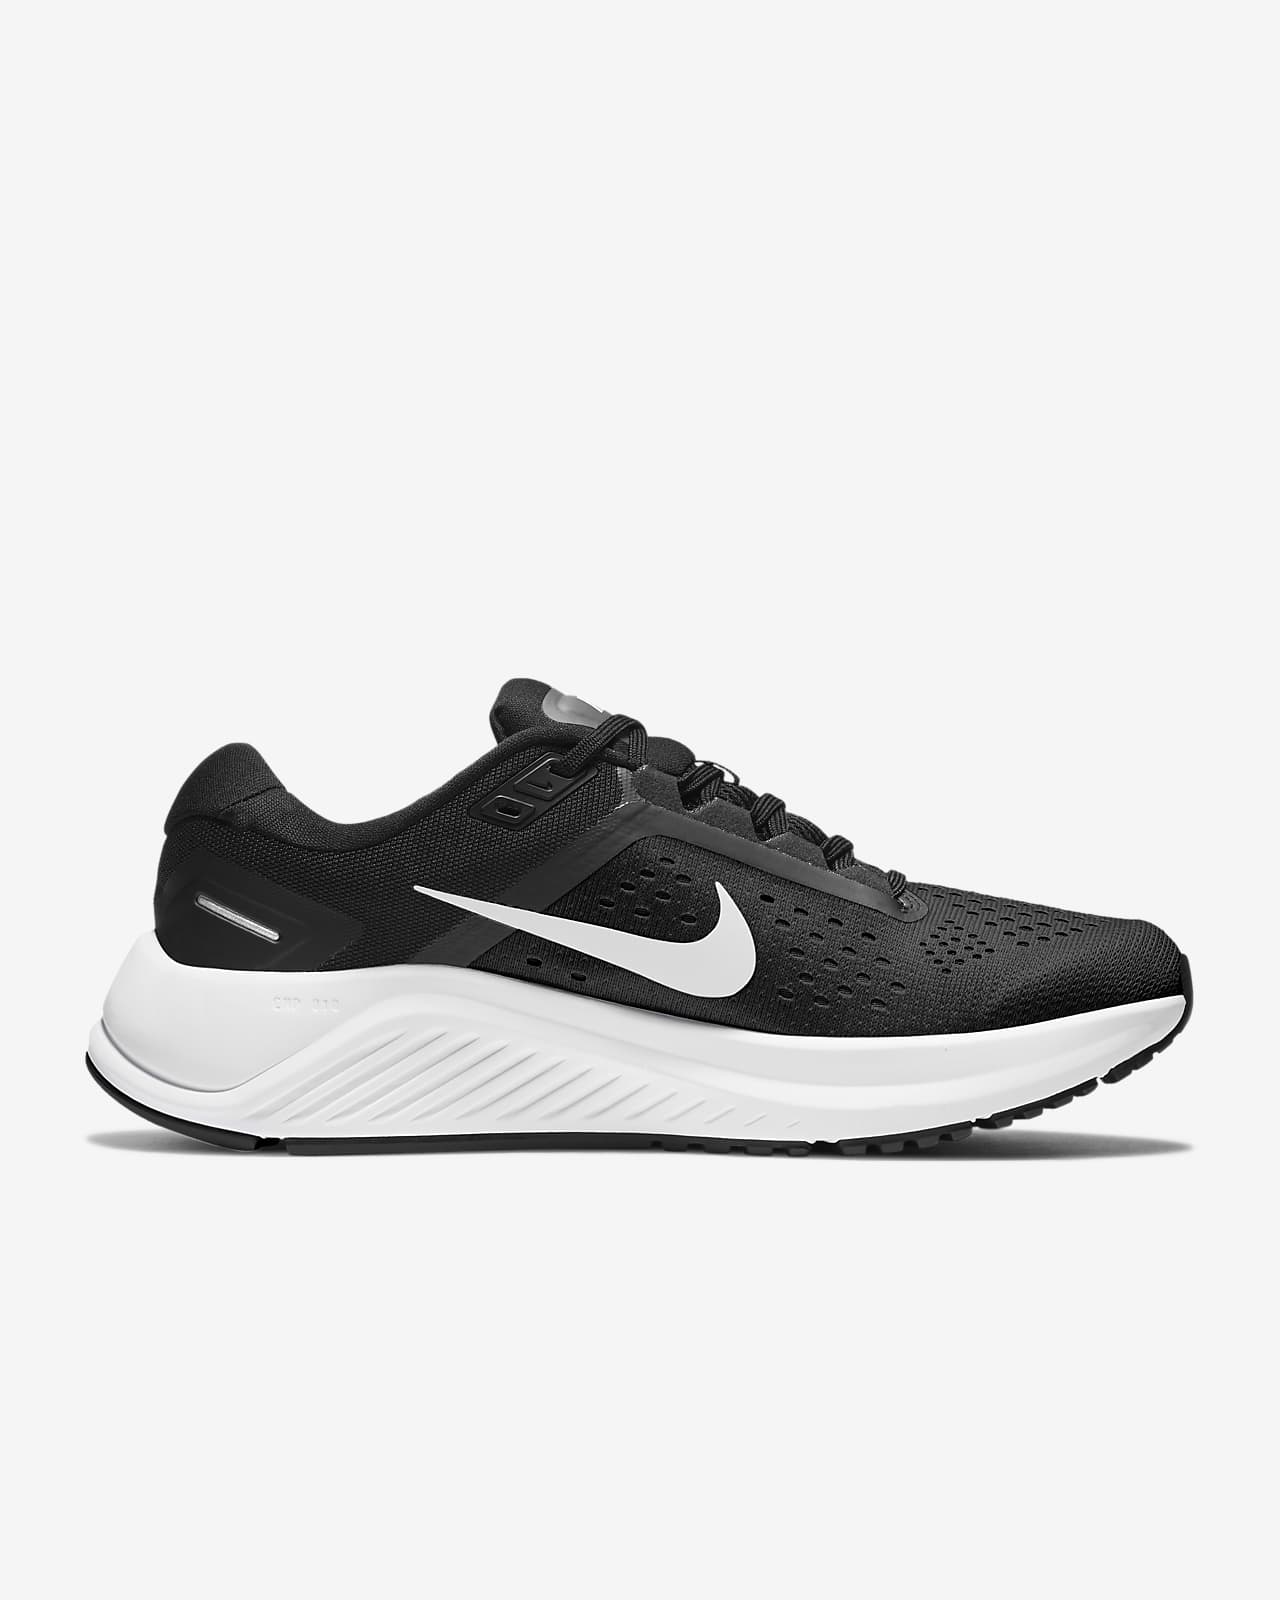 nike zoom structure 2 ladies running shoes